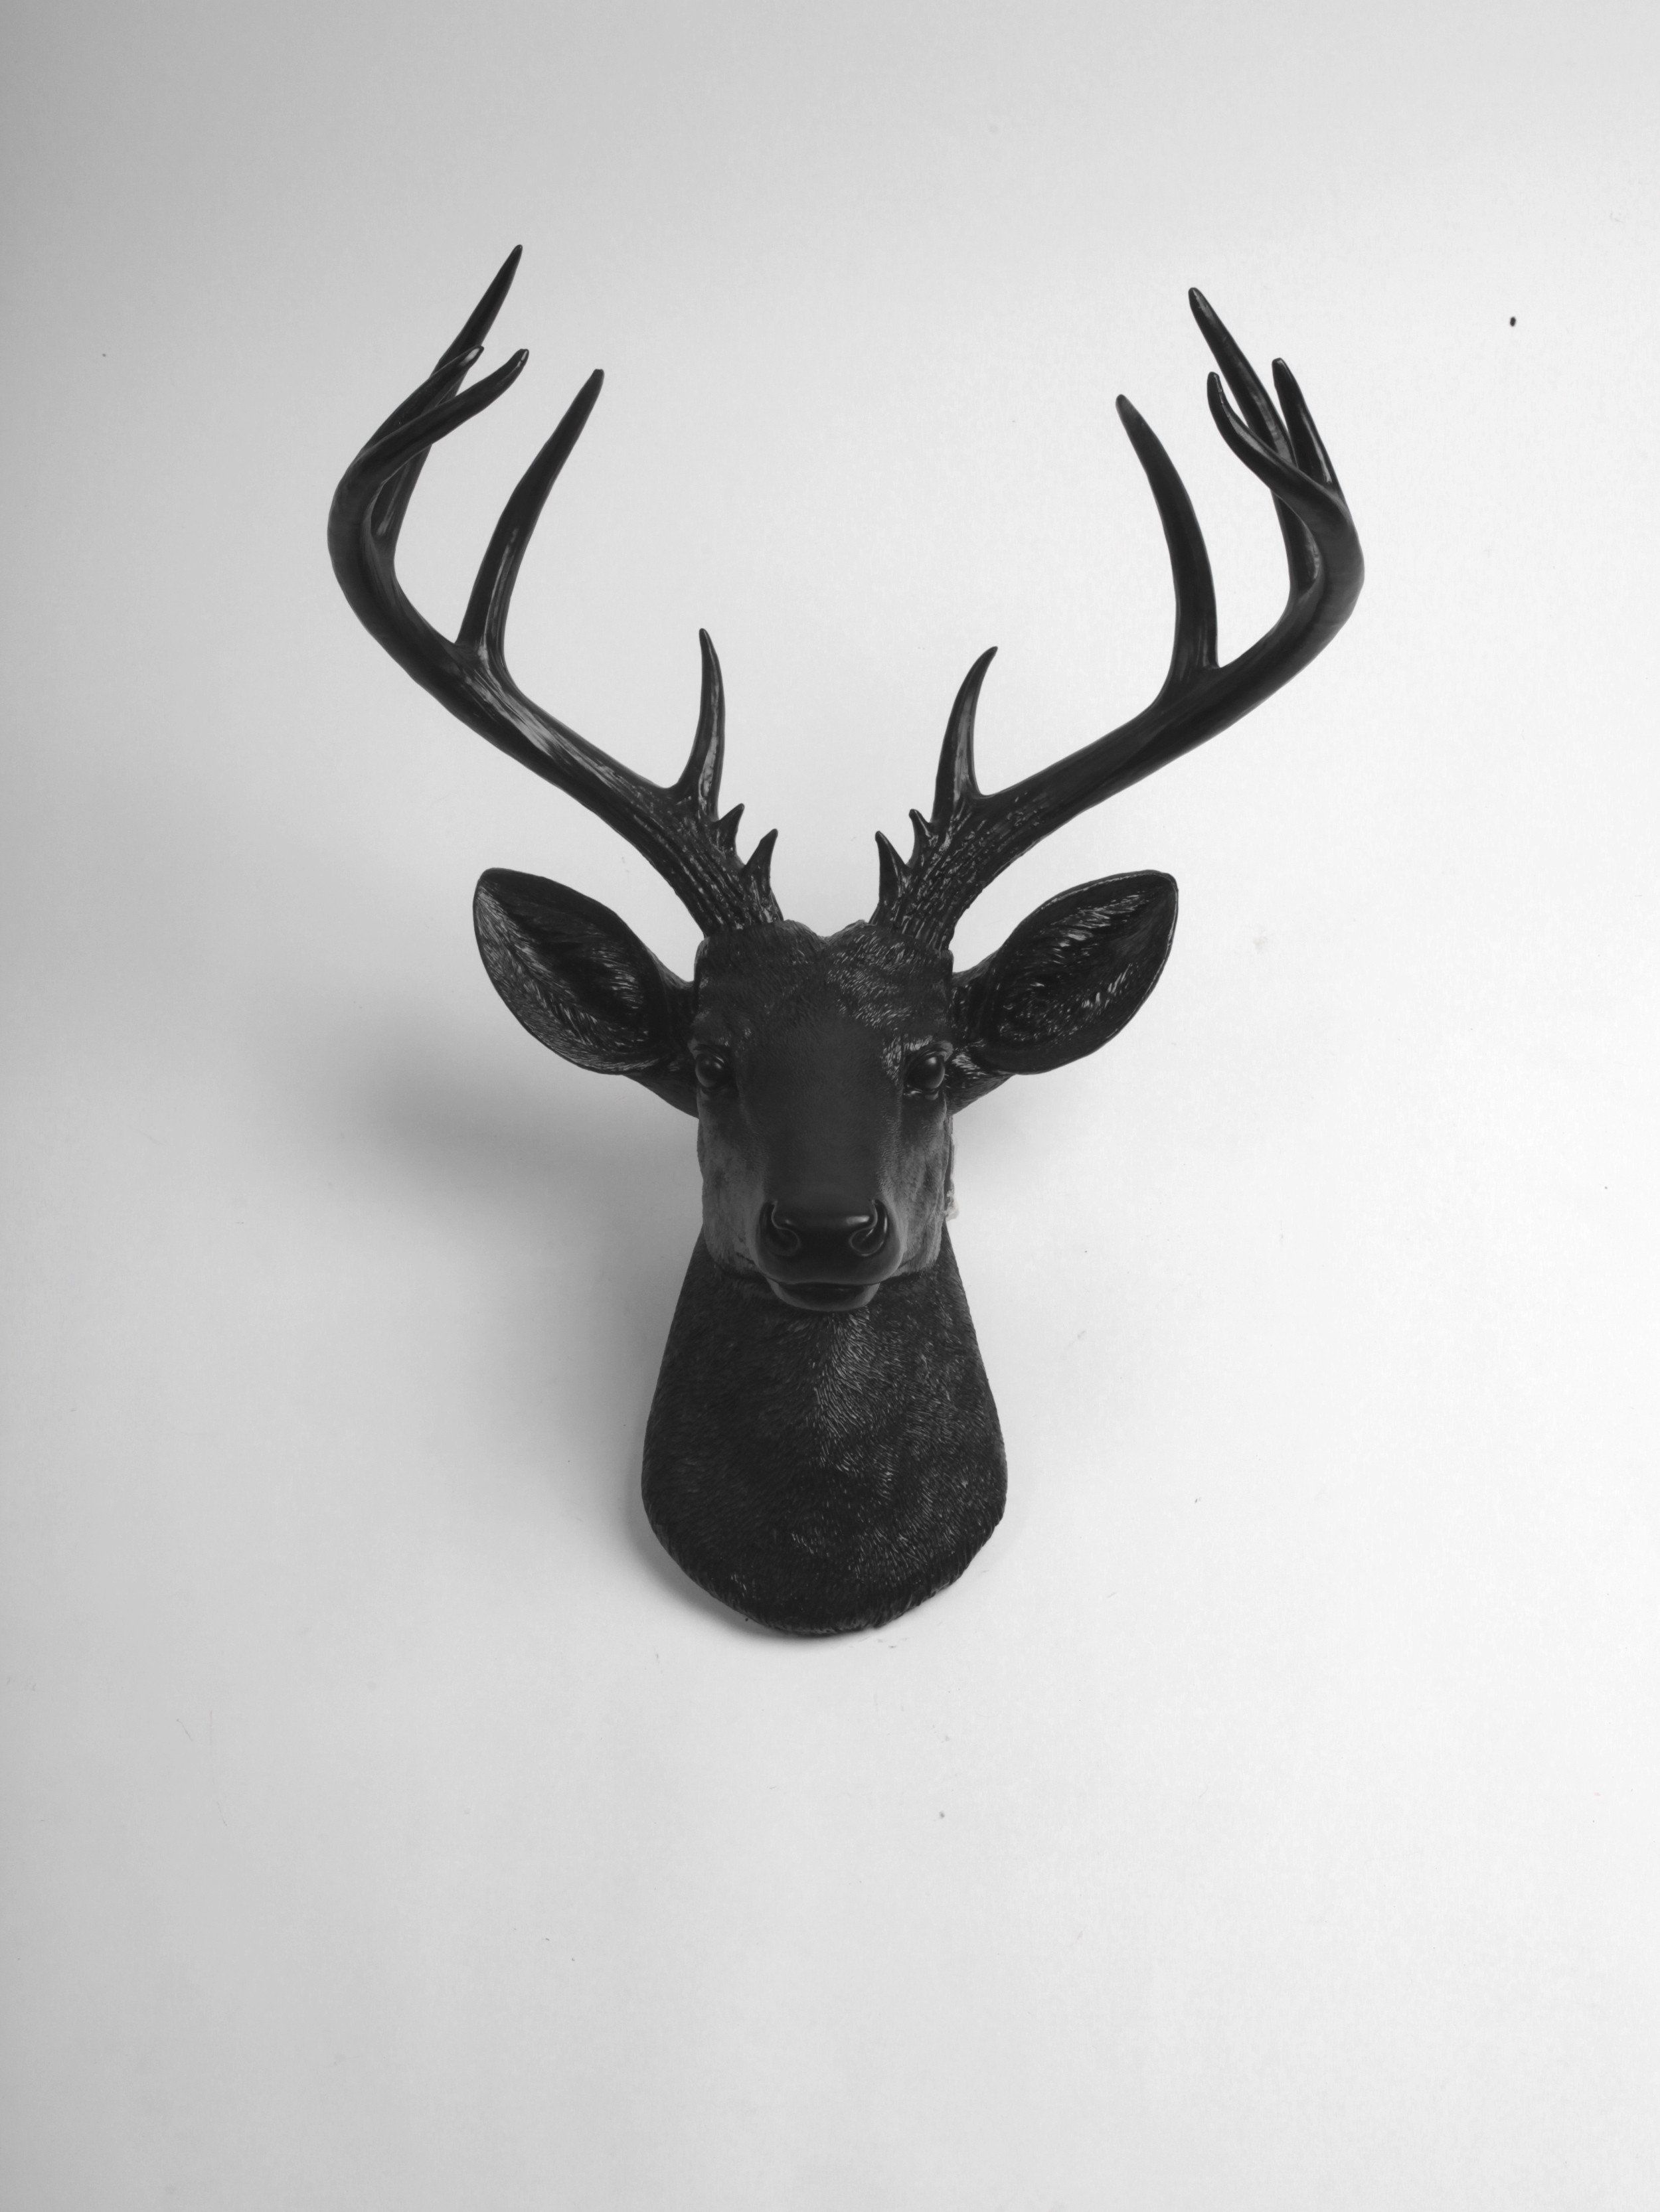 Newest Large Deer Head Faux Taxidermy Wall Decor With The Xl Ignatius, Stag Deer Head Wall Mount, Black Resin In  (View 6 of 20)